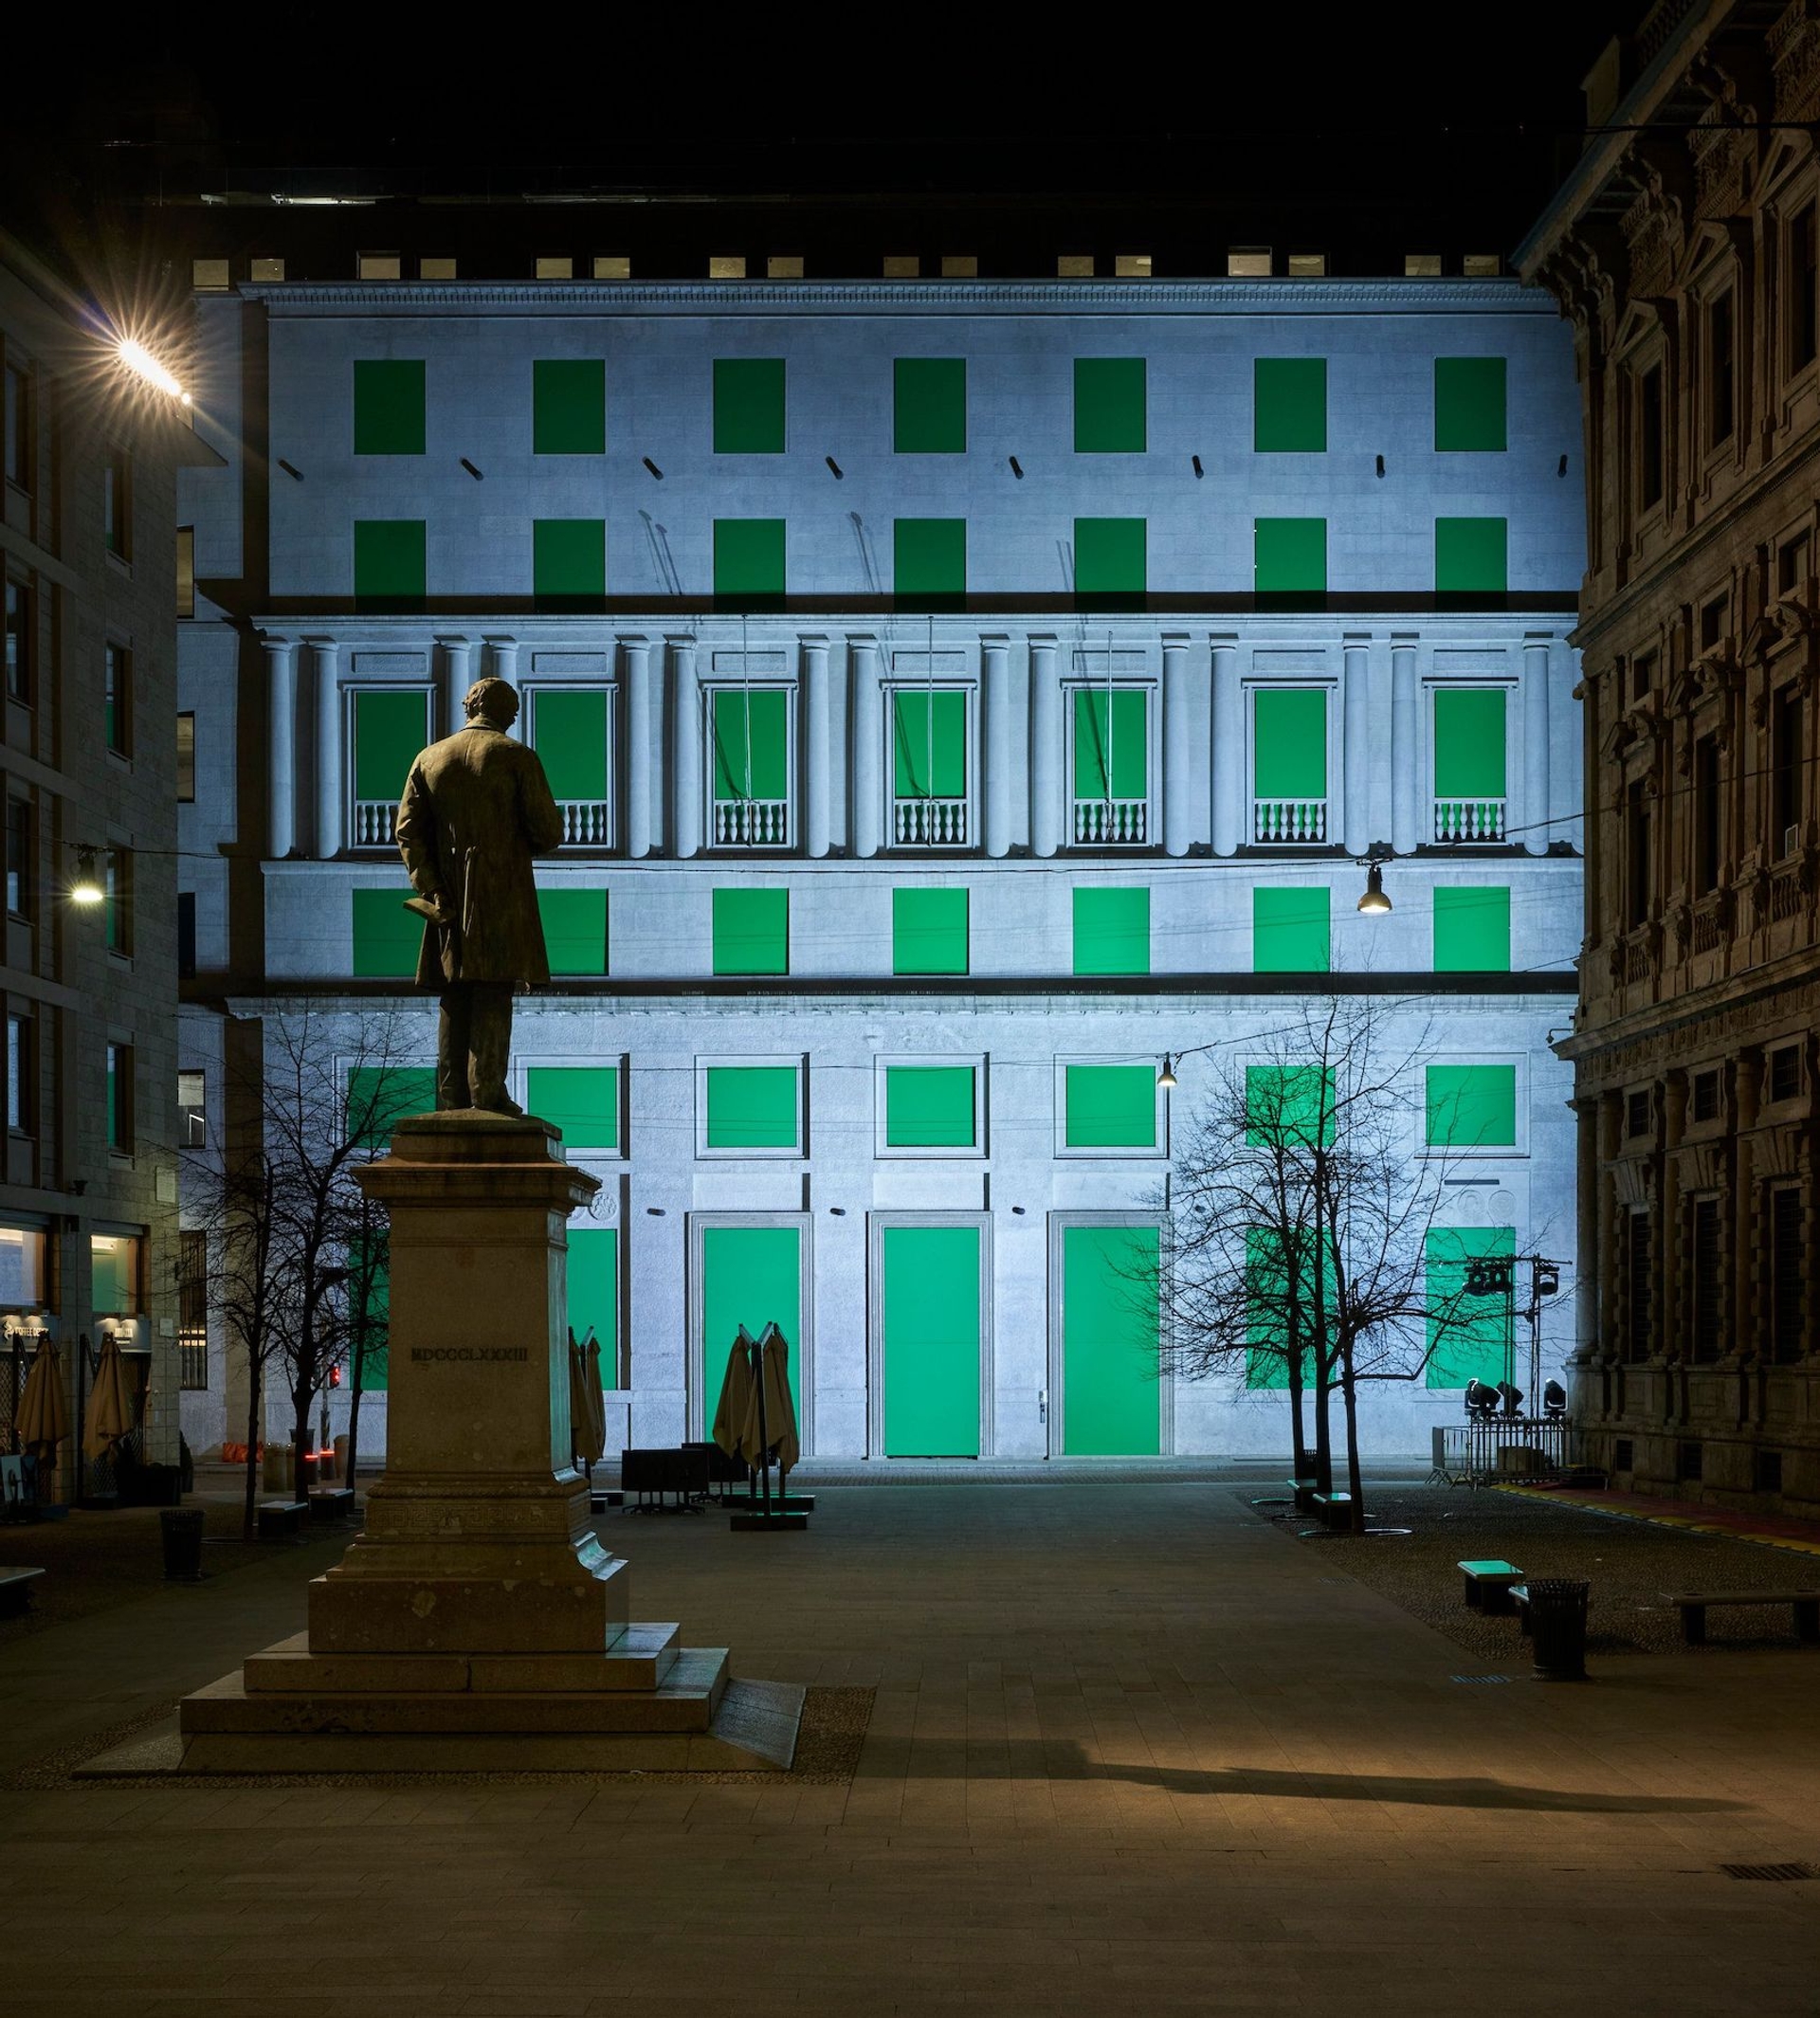 The exterior of Palazzo San Fedele, a late 19th-century building in the heart of Milan. The building will soon become Bottega Veneta's new headquarters, after extensive refurbishment by Studio Asti Architetti. 